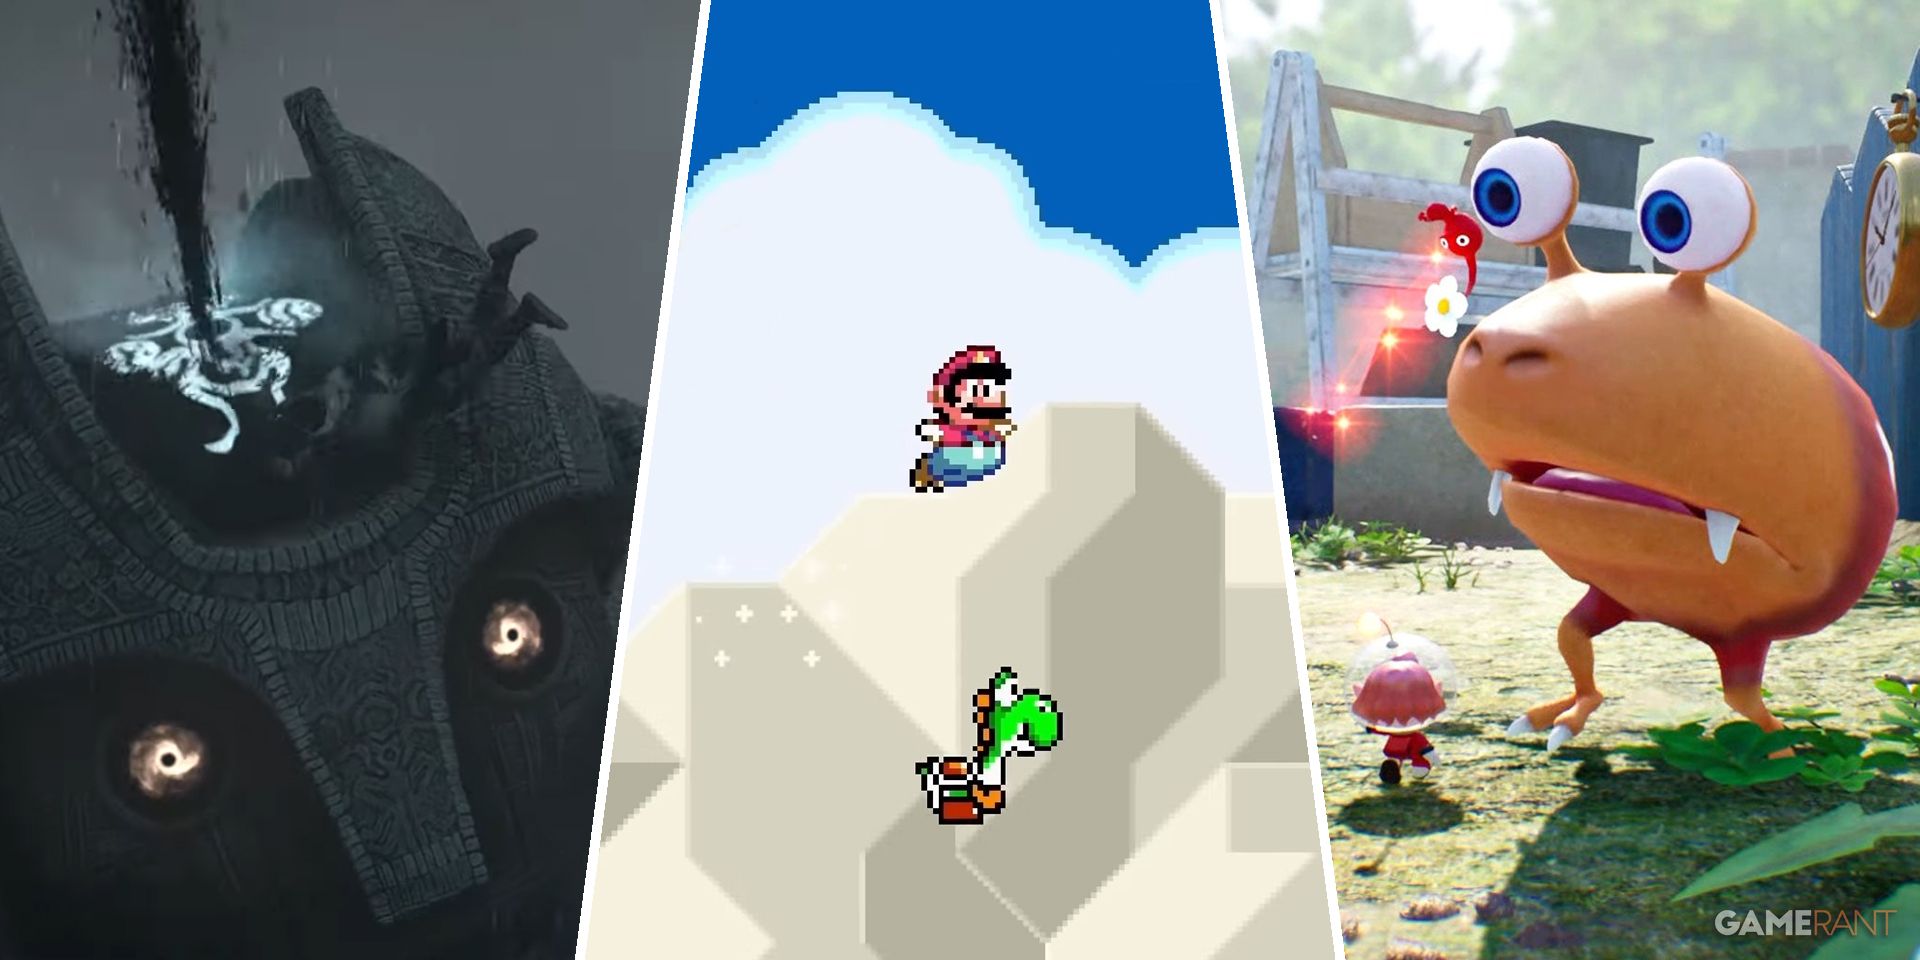 Games that Make You Feel Like the Bad Guy (Shadow of the Colossus, Super Mario World, and Pikmin 3)